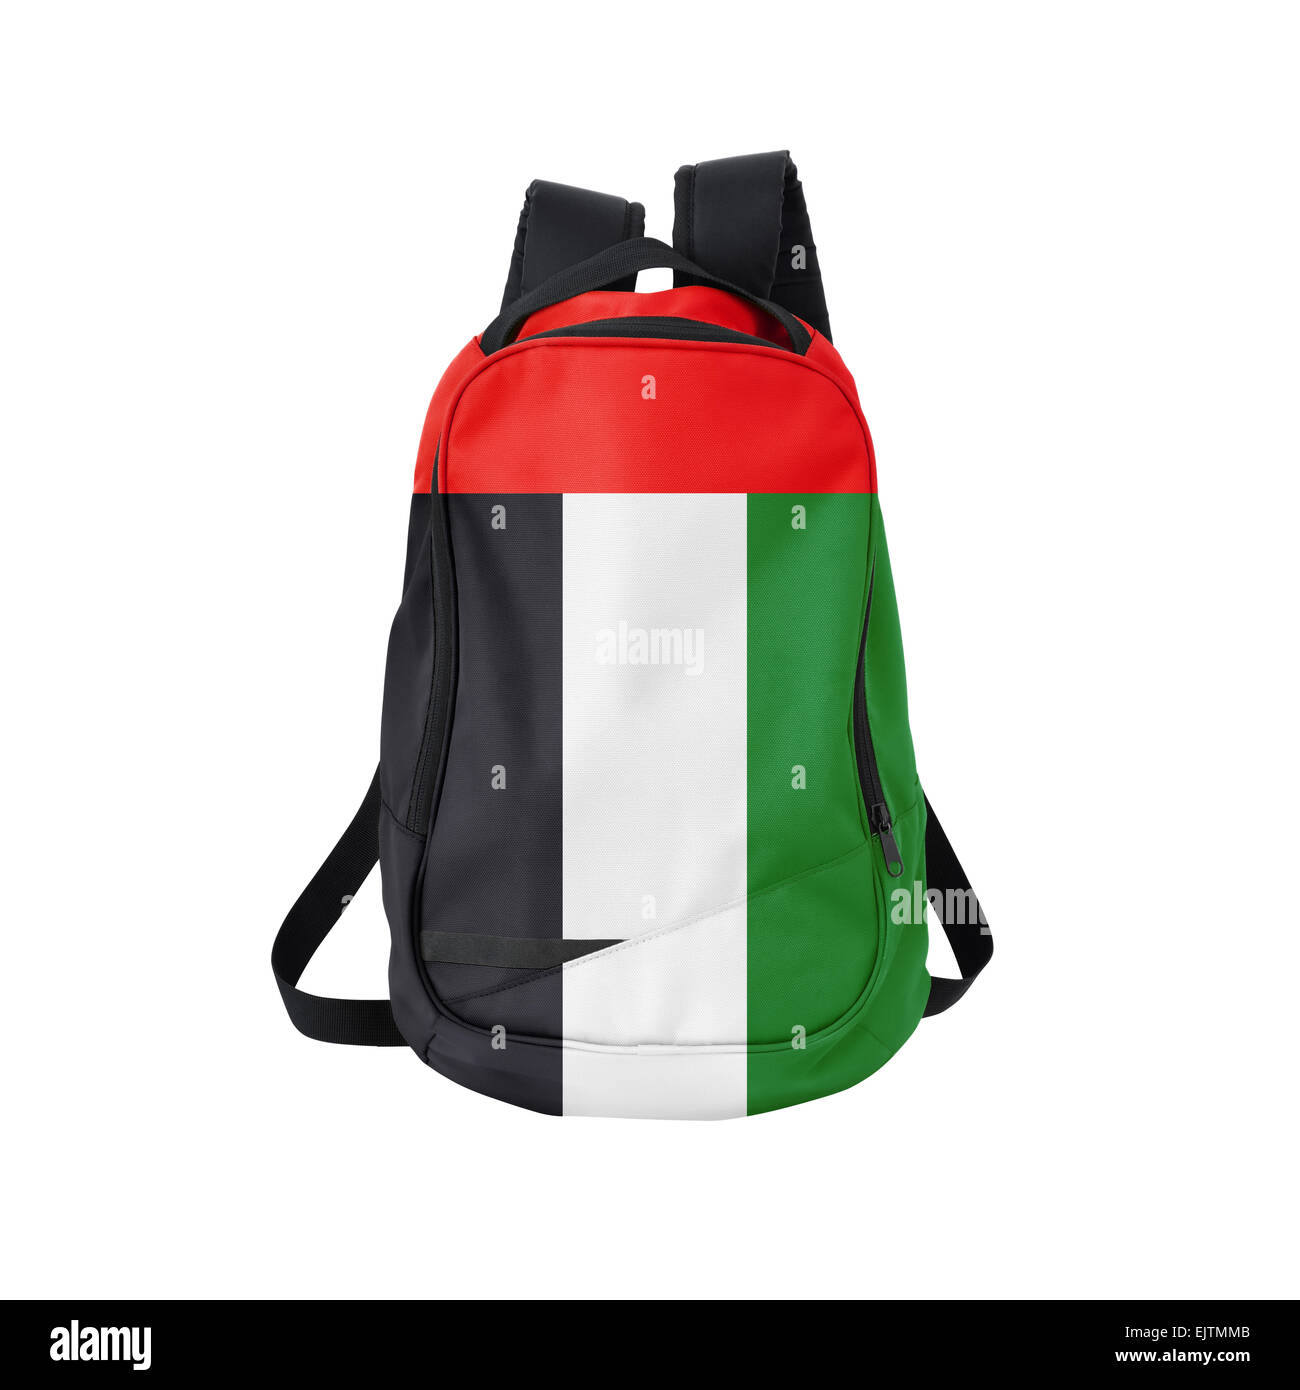 Arab Emirates flag backpack isolated on white background. Back to school concept. Education and study abroad. Travel and tourism Stock Photo